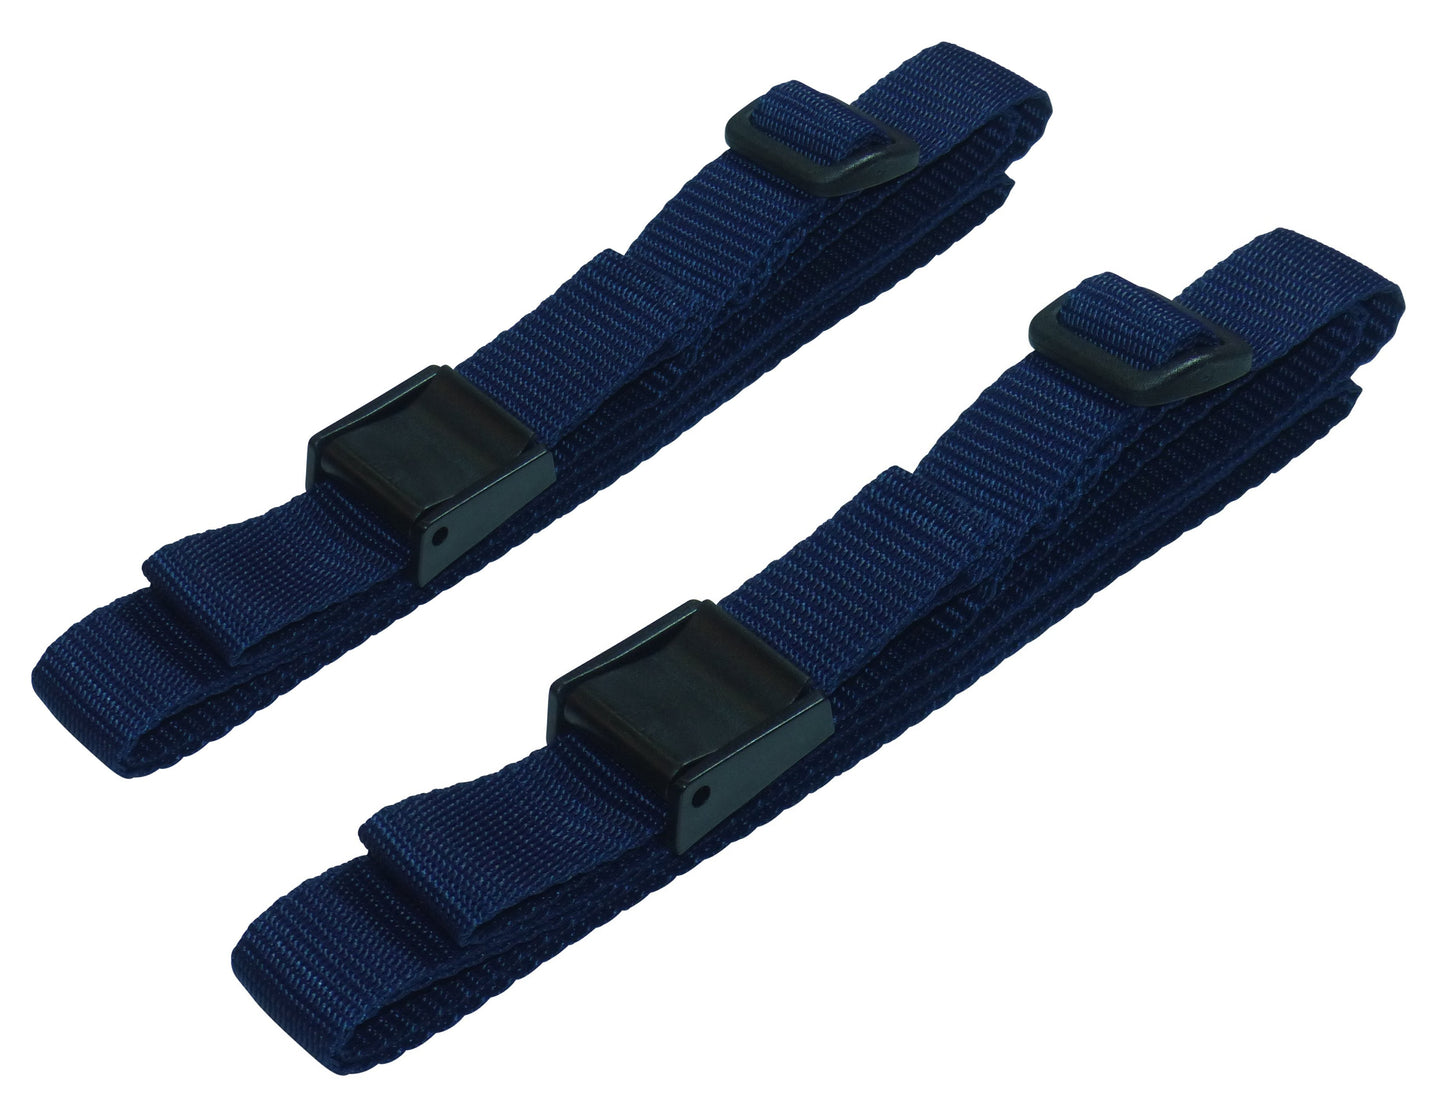 25mm Rivetted Strap with Plastic Cam Buckle & Triglide Buckles (Pair) in navy blue